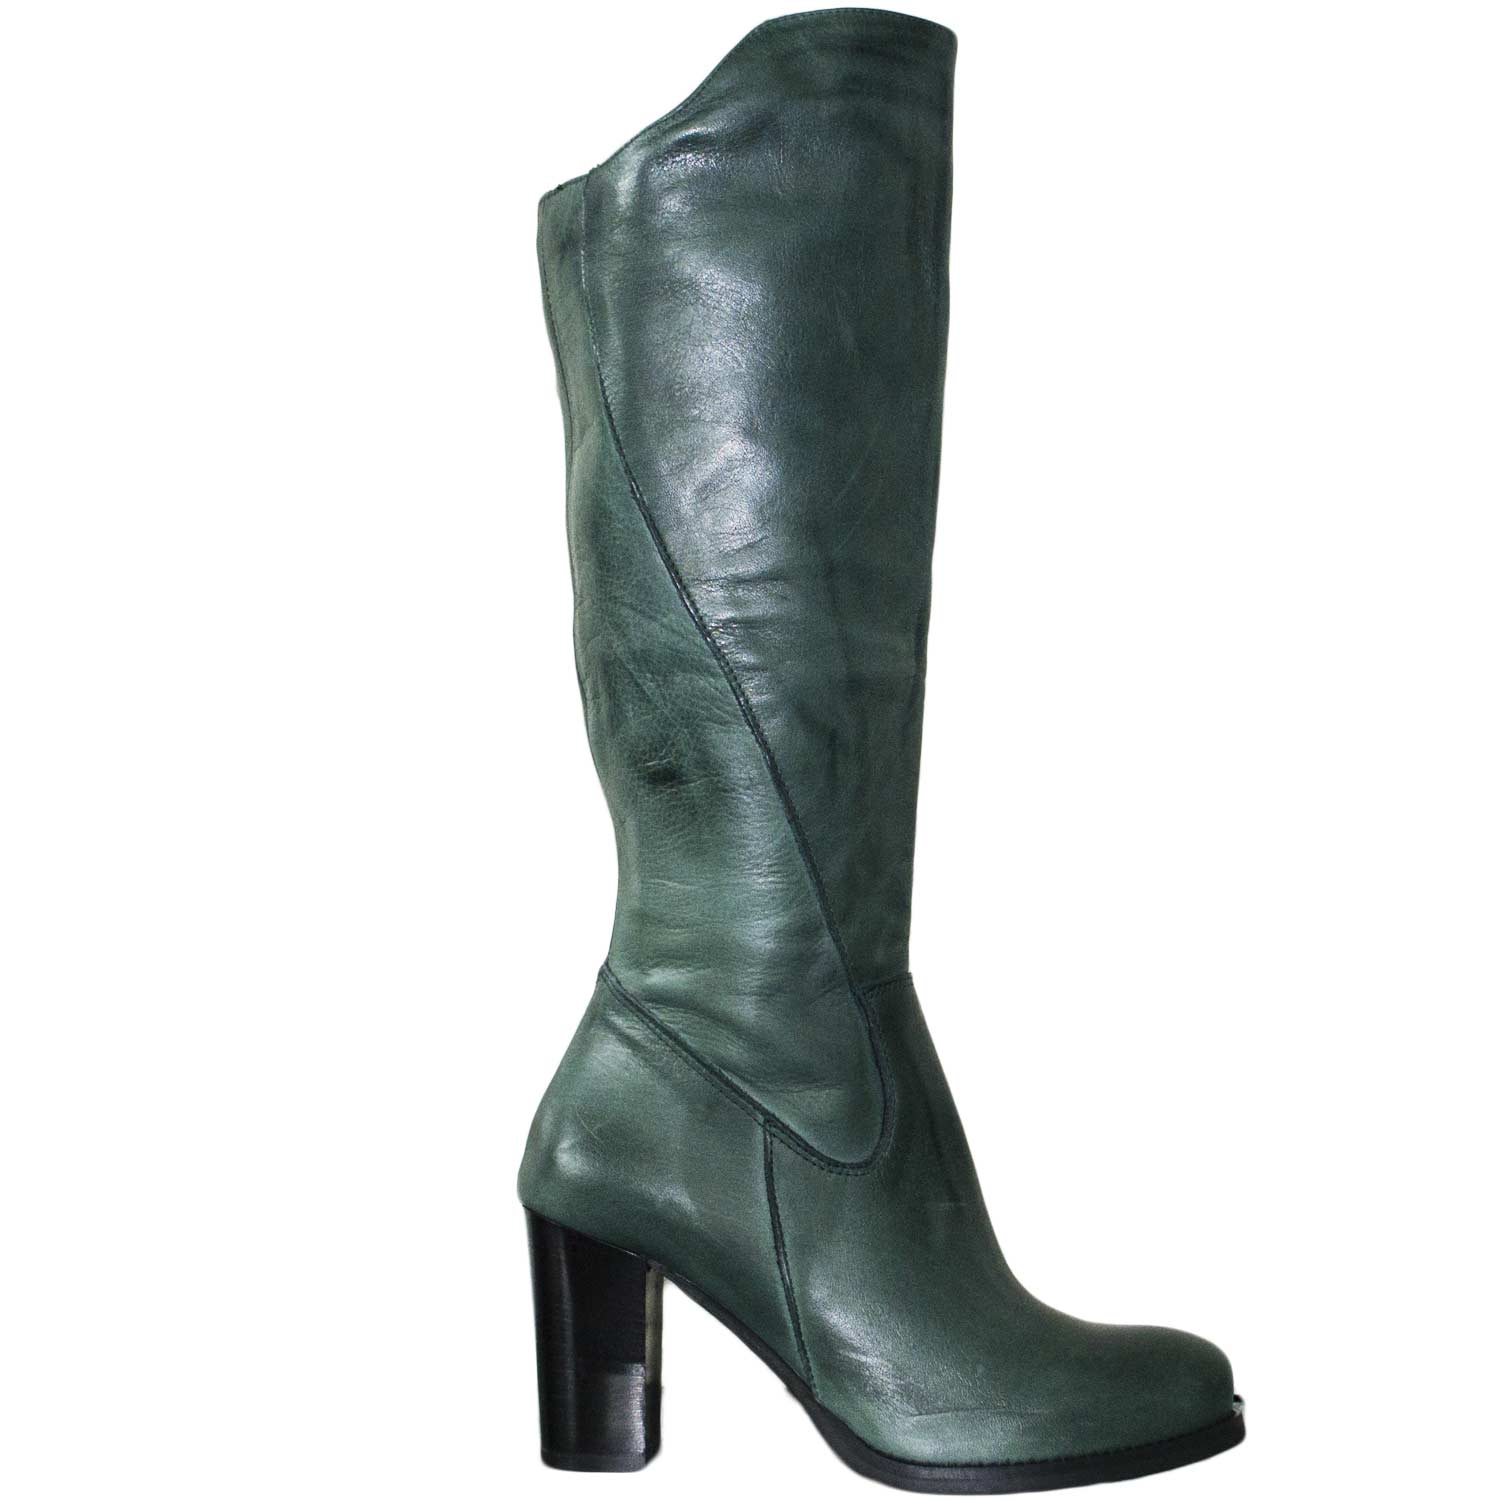 Stivale donna vera pelle verde tacco largo comfort made in italy art 10230  donna stivali Malu Shoes | MaluShoes